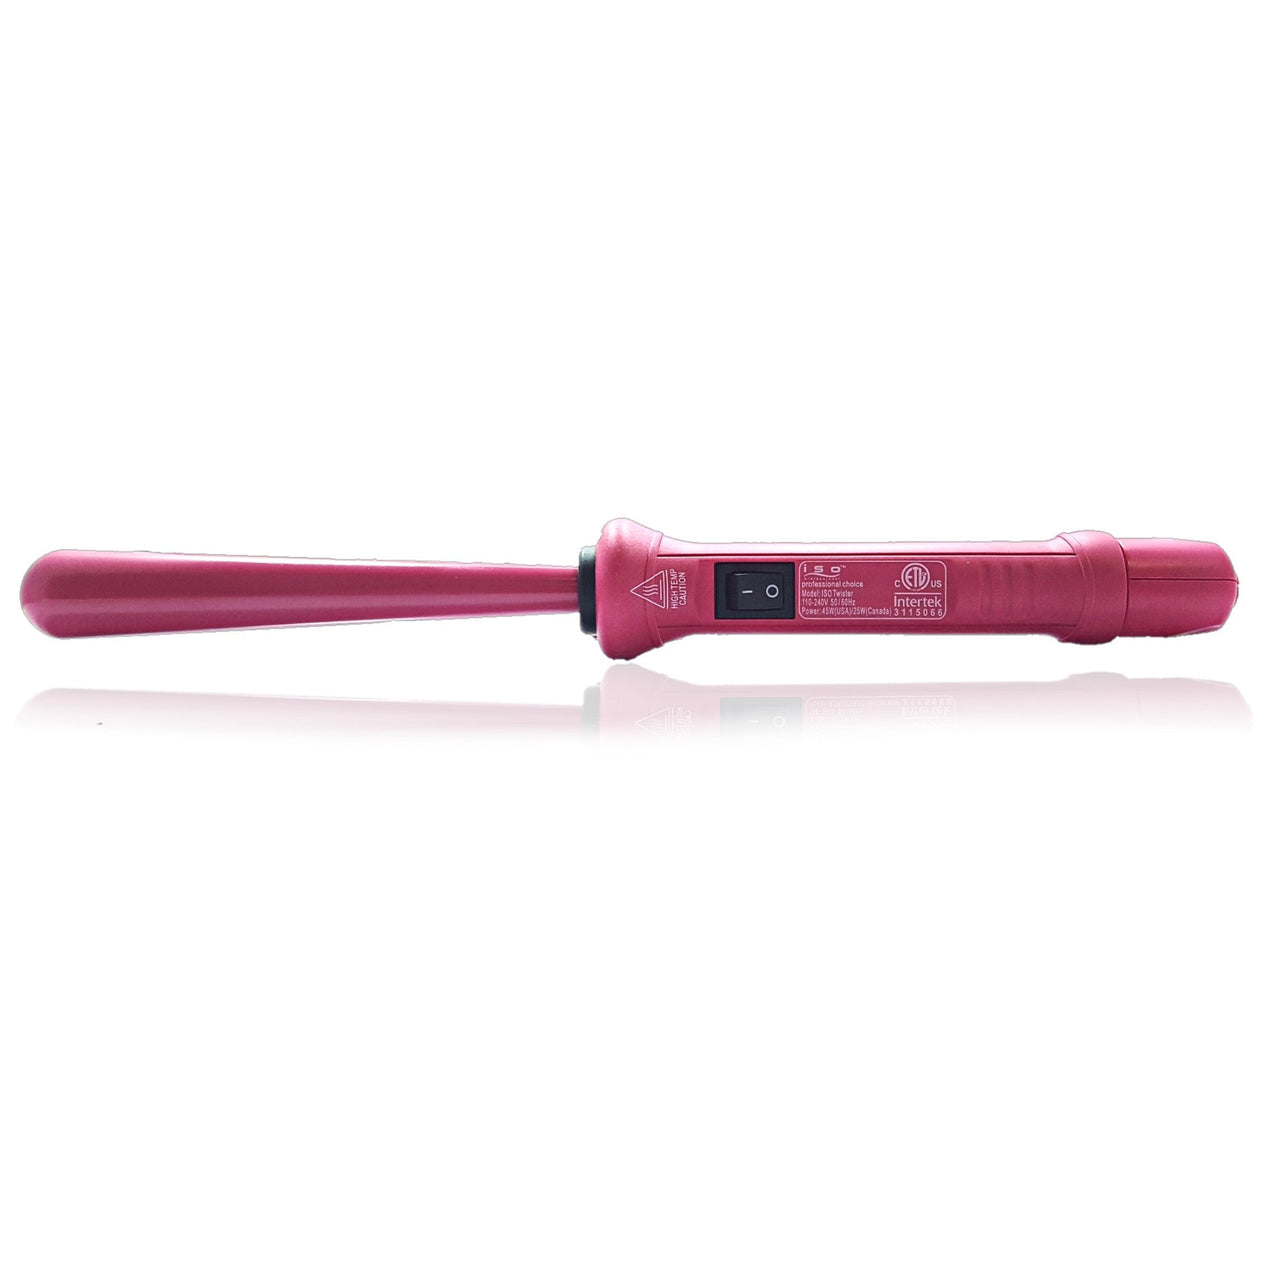 Tapered 13-25mm Tourmaline Ceramic Curling Iron Clipless Hair Twister Pink with Protective Glove